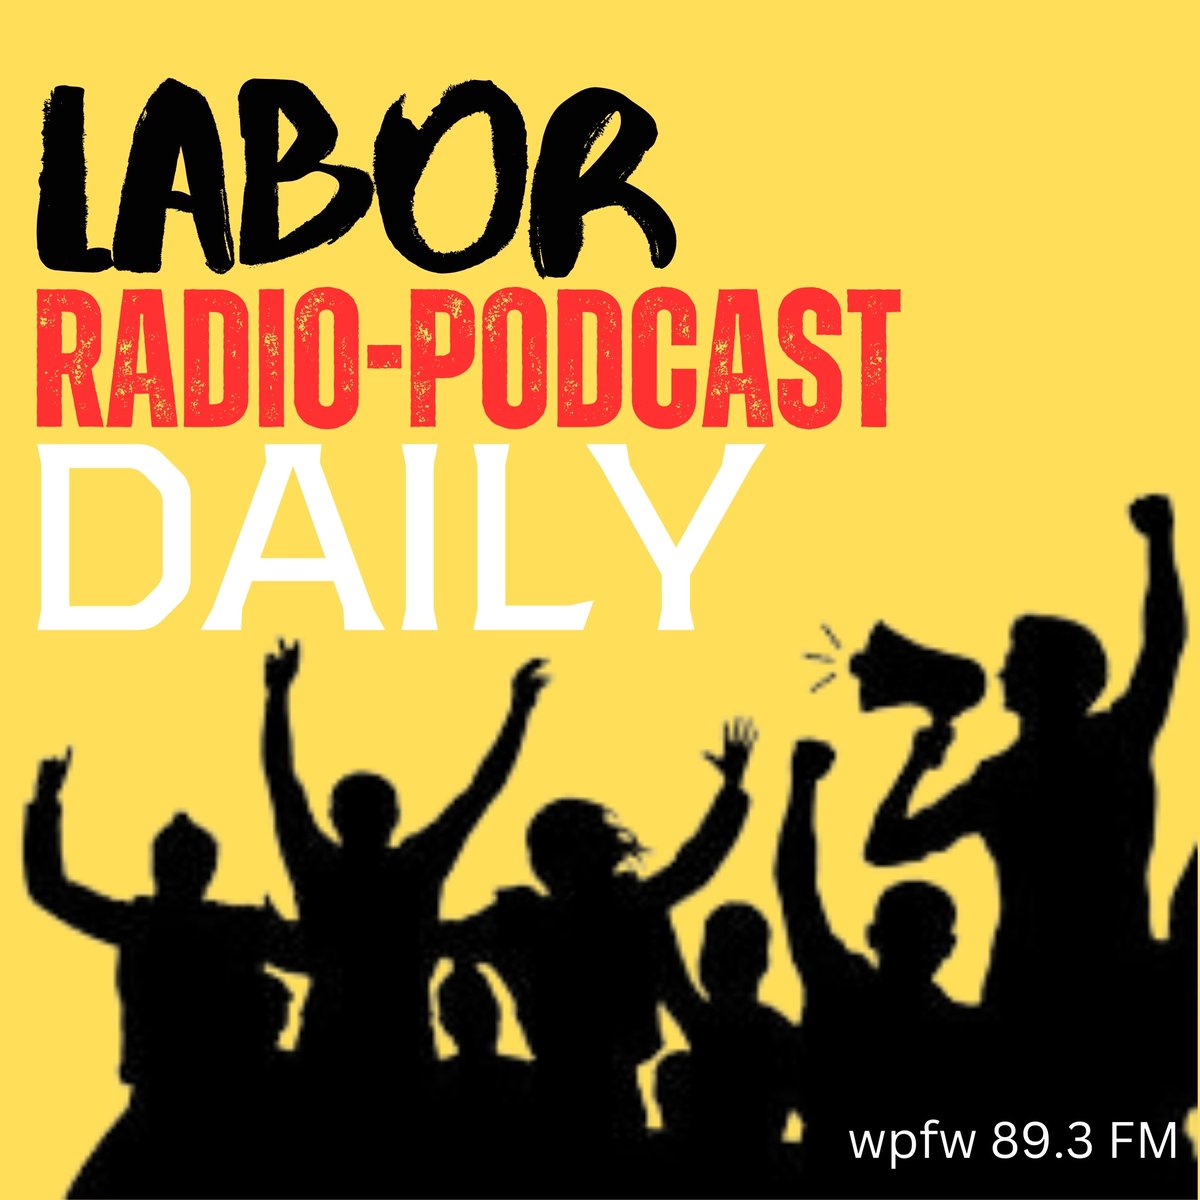 The Labor Radio Podcast DAILY goes on the air at 7:15 AM Eastern on @WPFWDC. Listen live at wpfwfm.org/radio/ Looking for more podcasts and radio shows that speak to working people about working people's issues? Visit laborradionetwork.org #1u #UnionStrong #LaborRadioPod